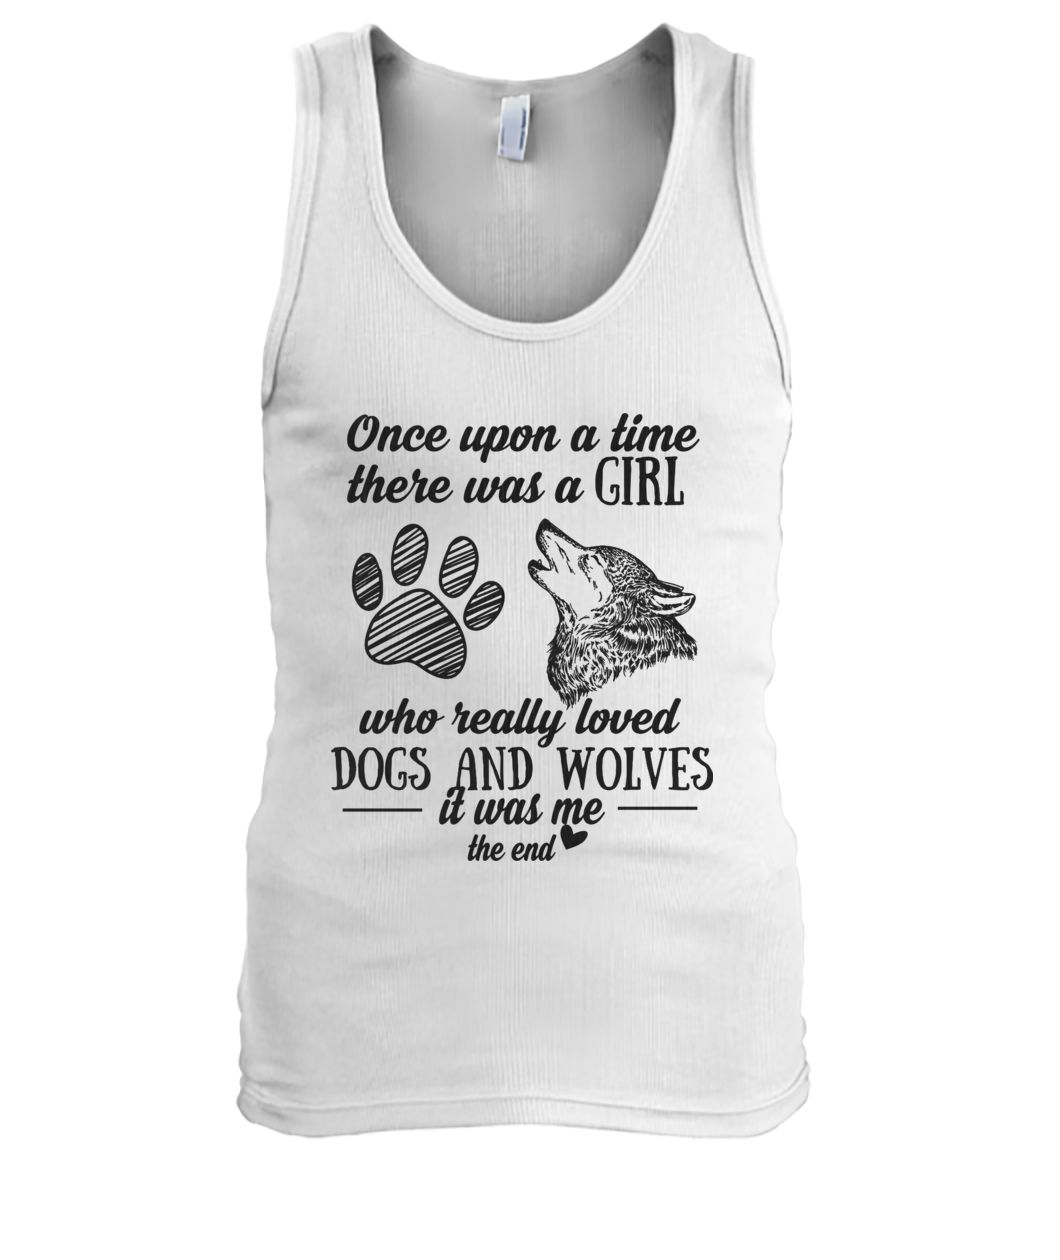 Once upon a time there was a girl who really loved dogs and wolves men's tank top